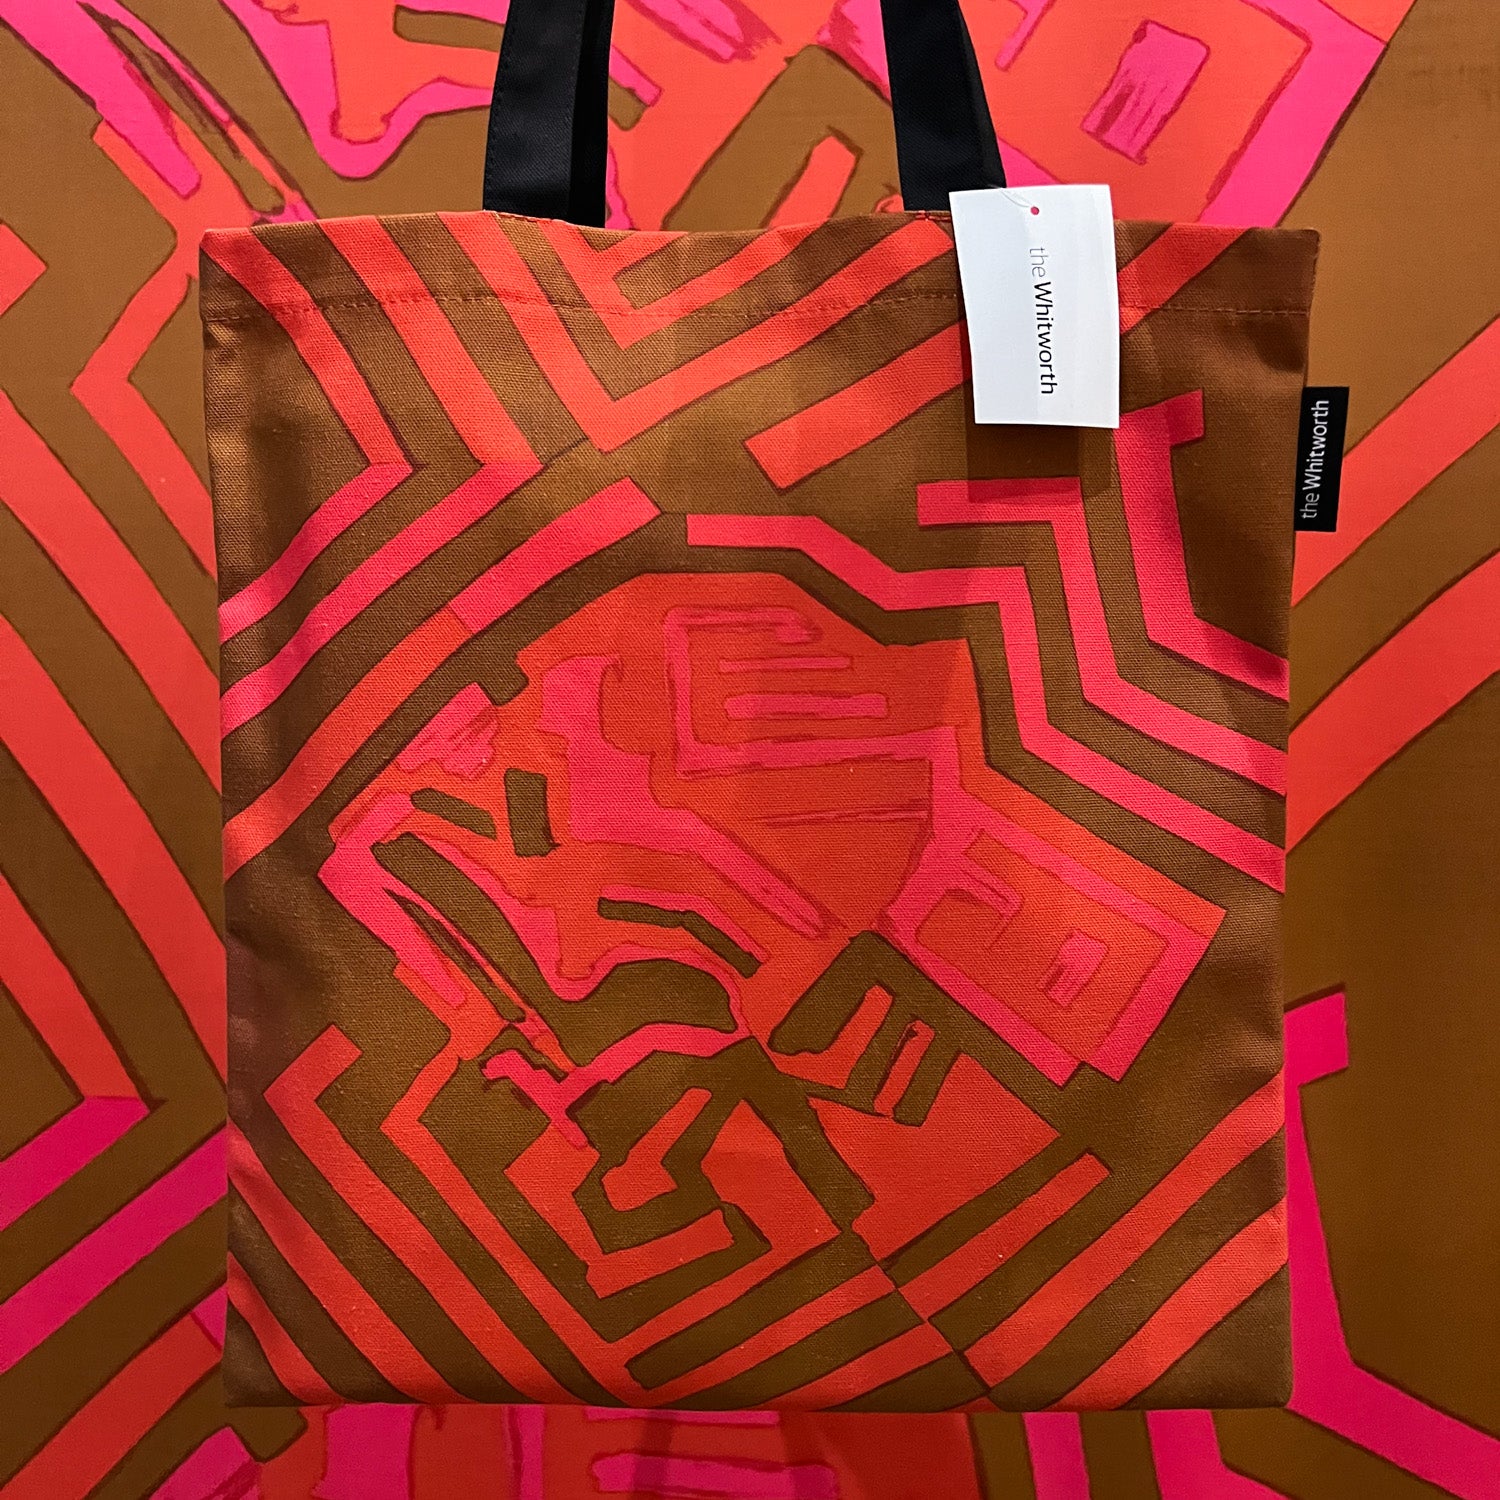  A person holding a tote bag with a black handle featuring Shirley Craven's sixty three design, in front of the textile design in the Whitworth's exhibition space. The tea towel has a white label attached with Whitworth's logo.